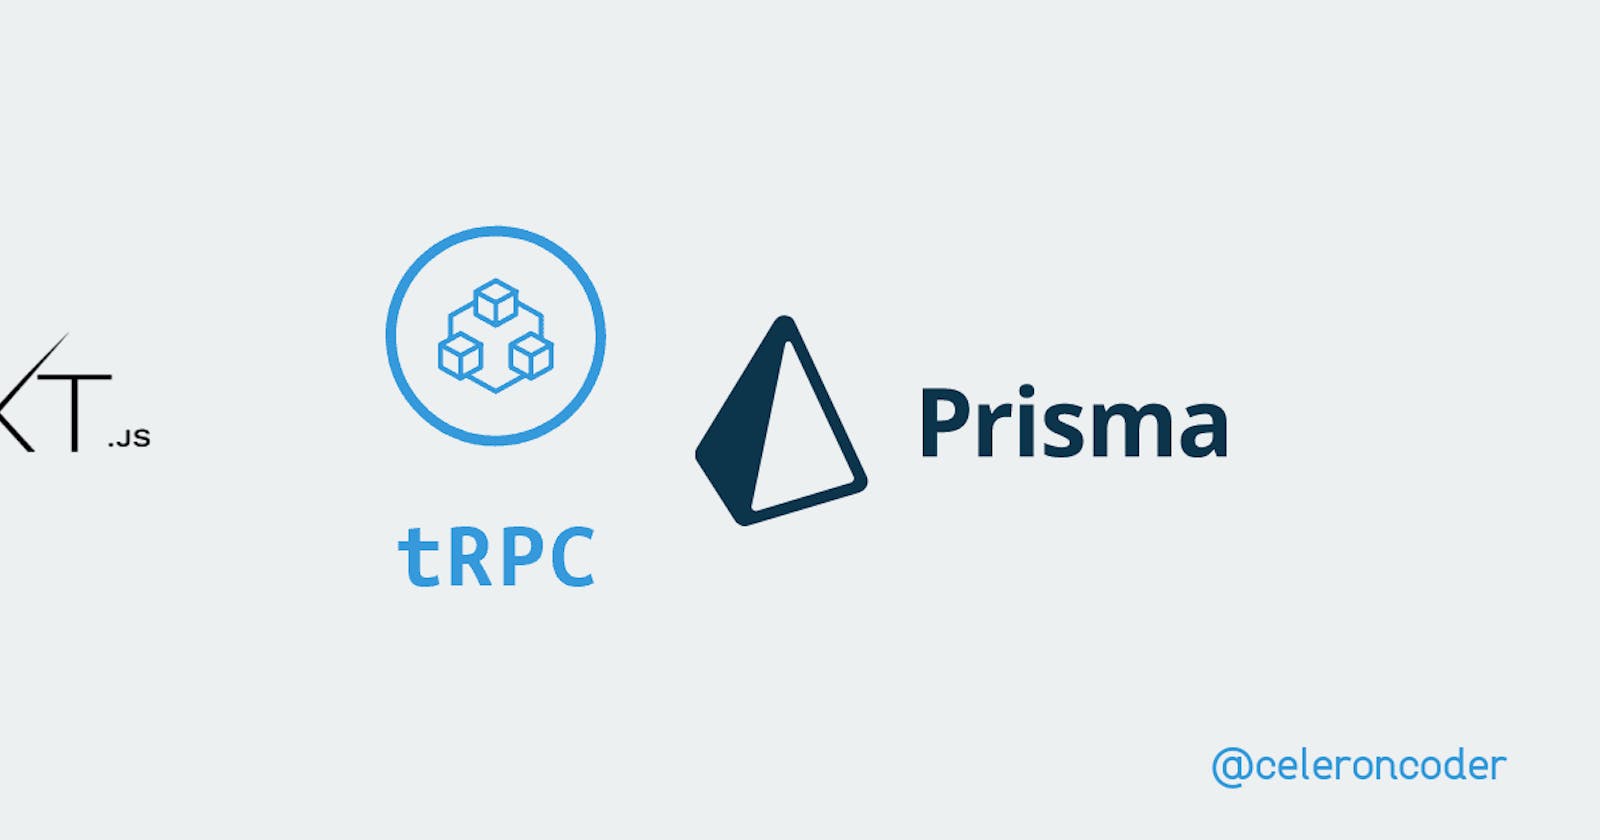 The type-safe guide to tRPC